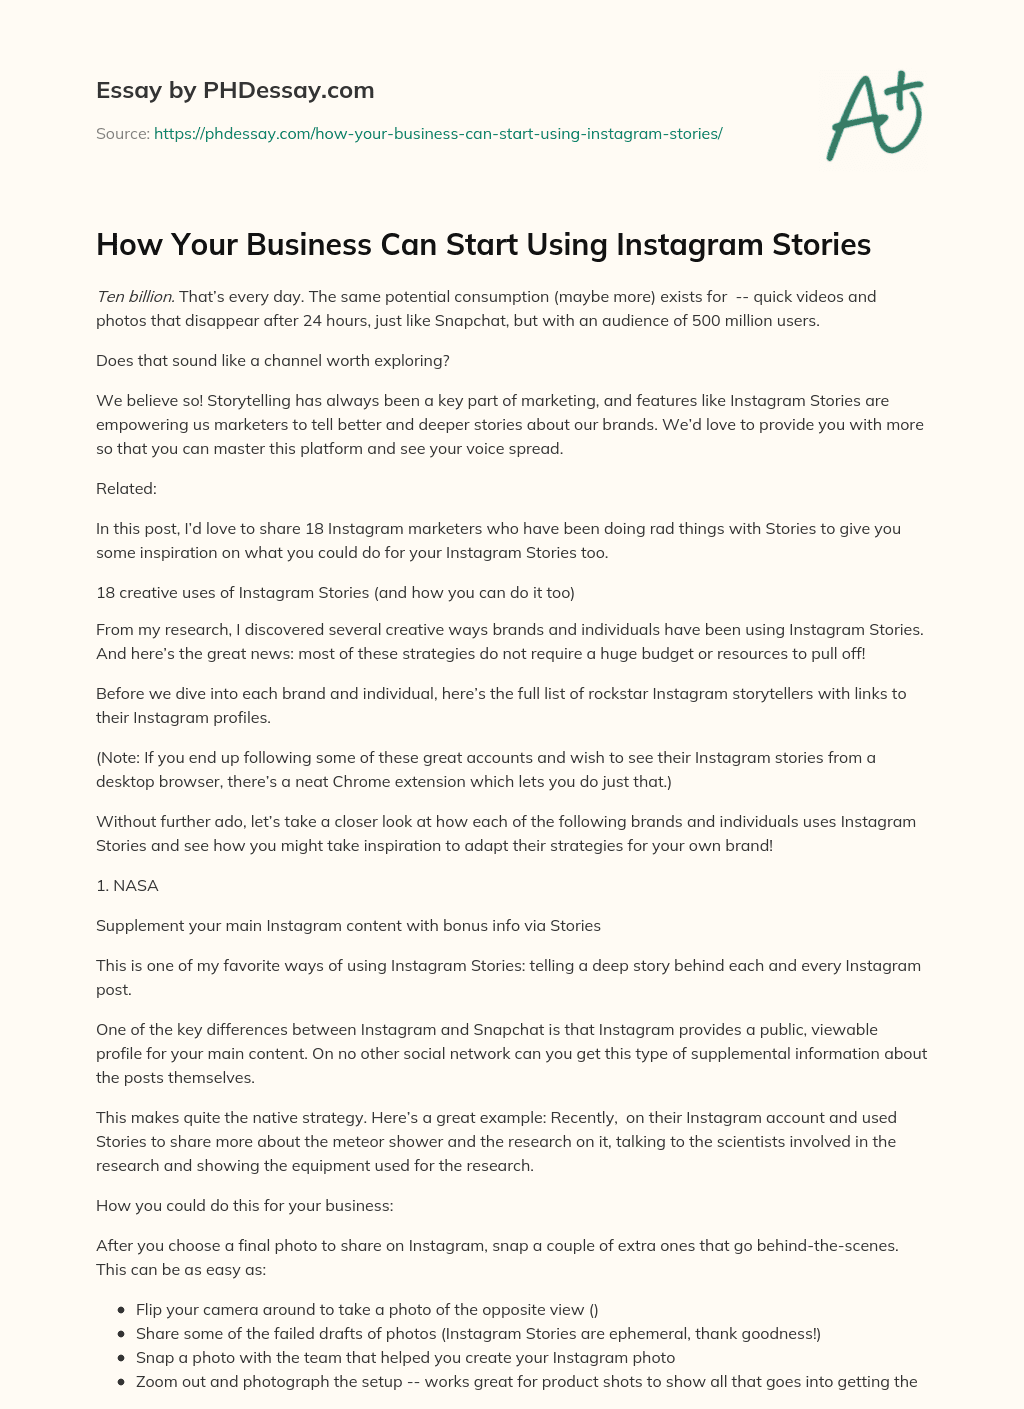 How Your Business Can Start Using Instagram Stories essay